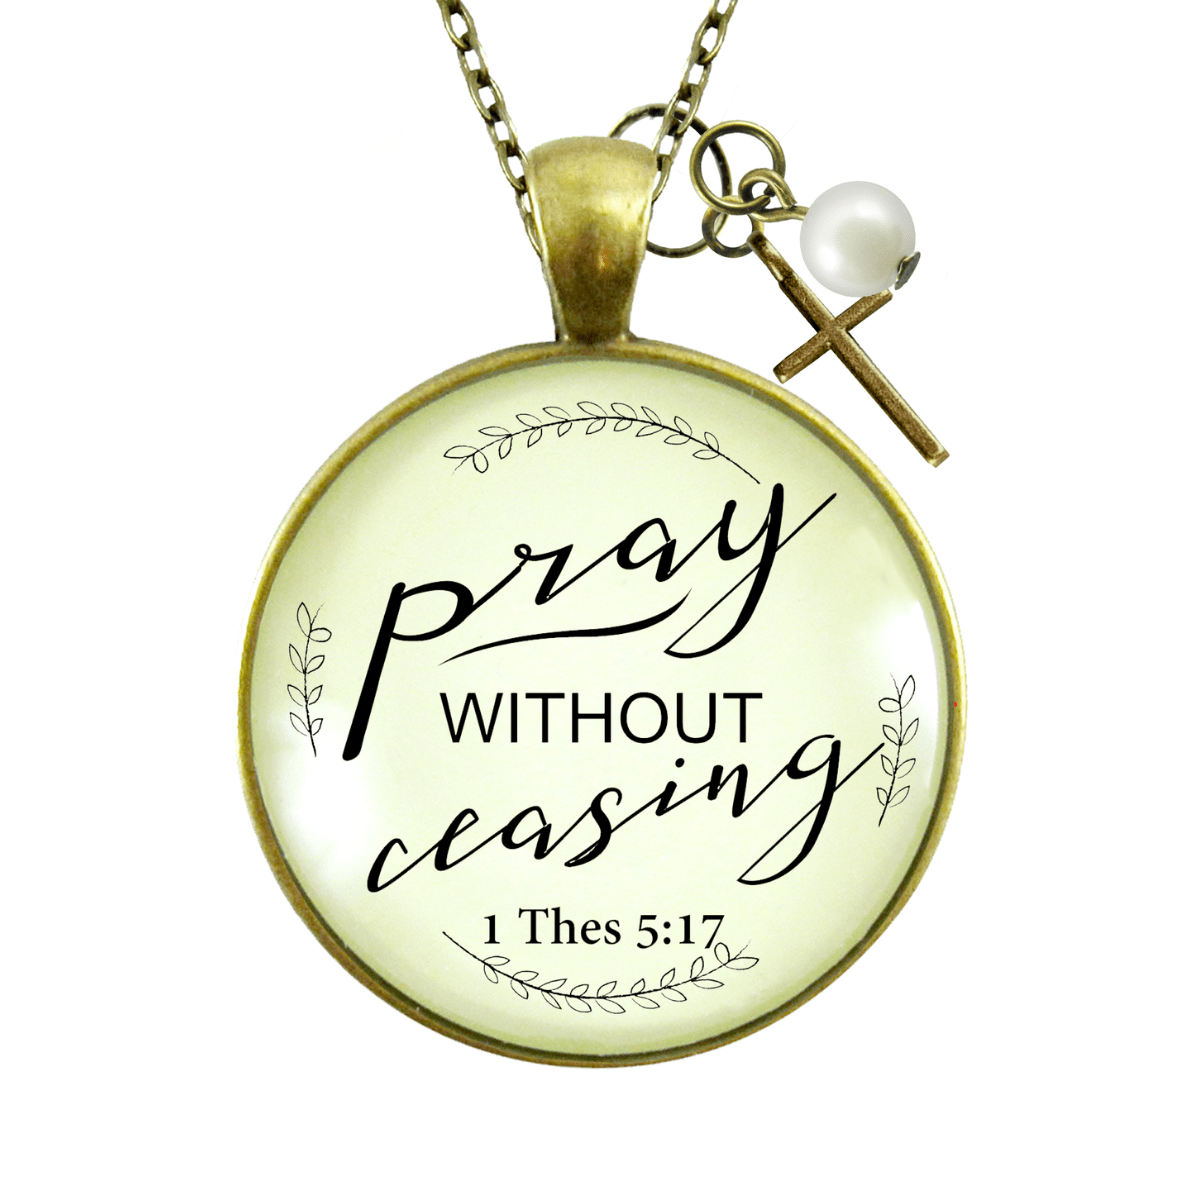 Gutsy Goodness Pray Without Ceasing Faith Prayer Cross Necklace Christian Jewelry - Gutsy Goodness;Pray Without Ceasing Faith Prayer Cross Necklace Christian Jewelry - Gutsy Goodness Handmade Jewelry Gifts